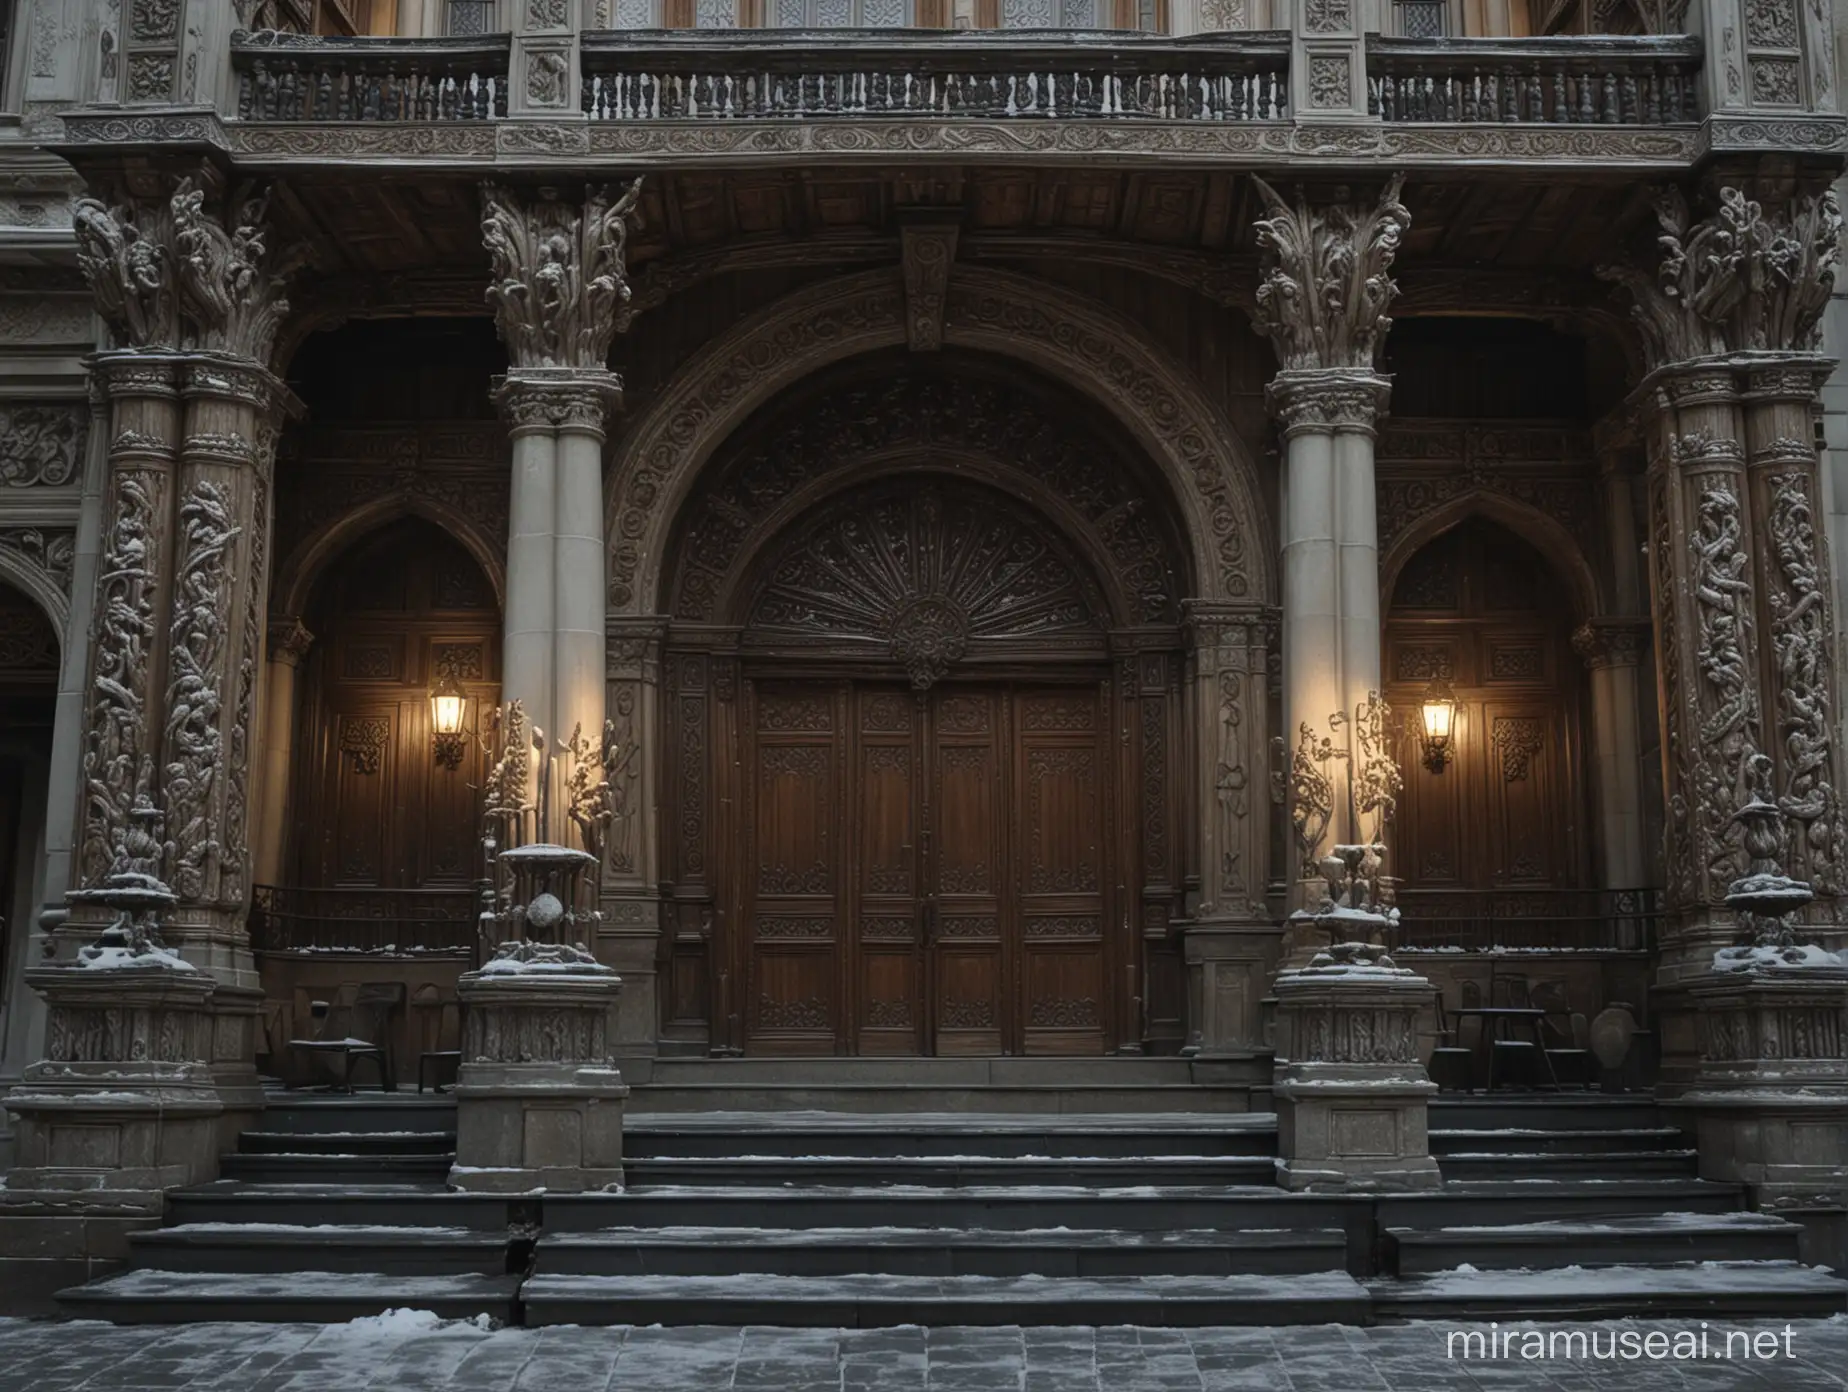 Gothic Medieval Theater House Ornate Woodwork and Silver Plating in Snowy Street View